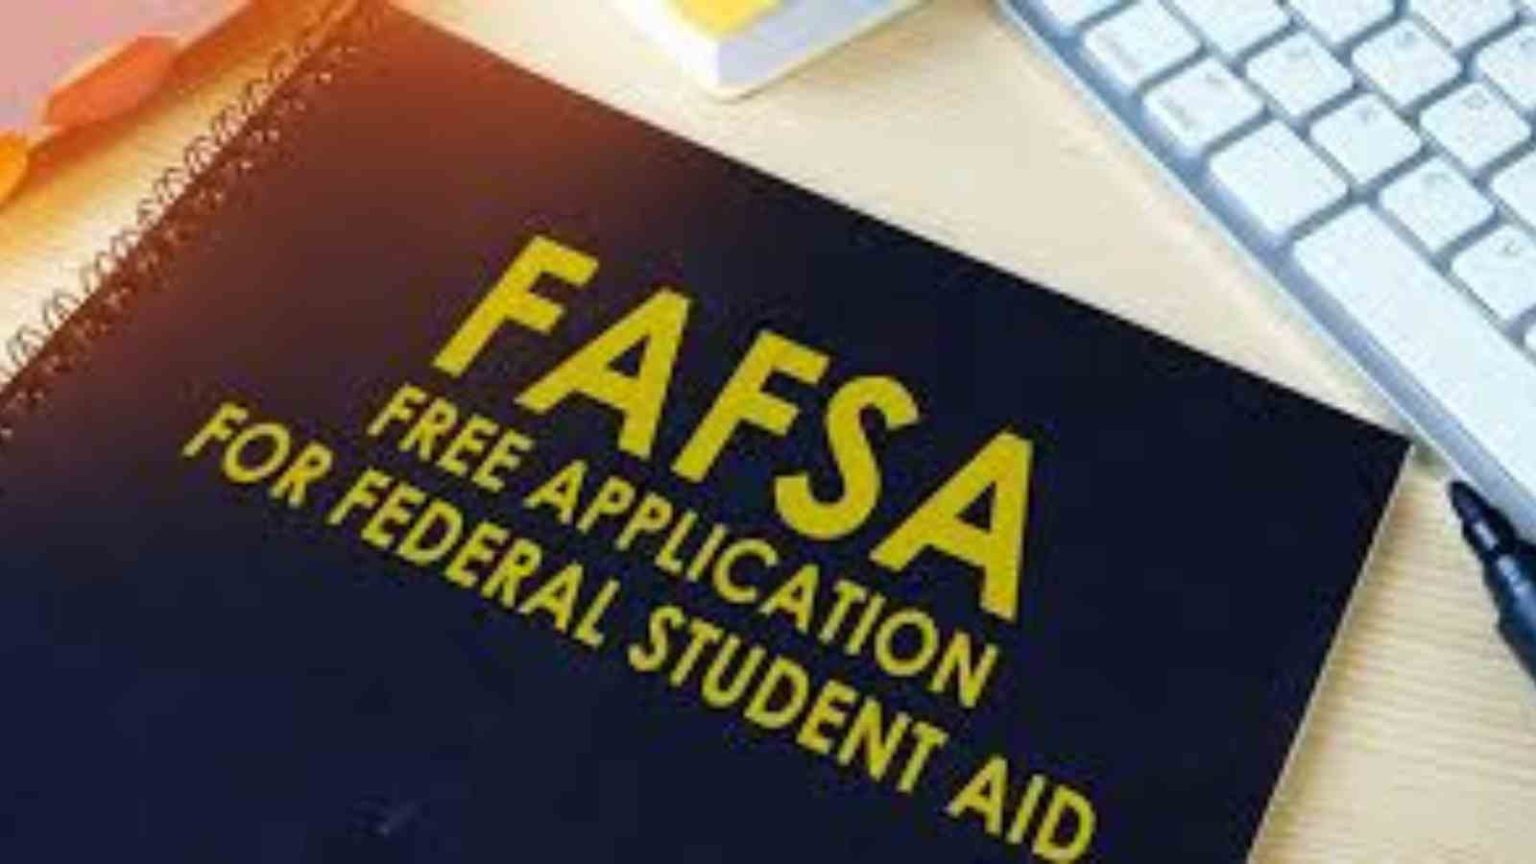 202425 FAFSA Changes Have a look at the new changes